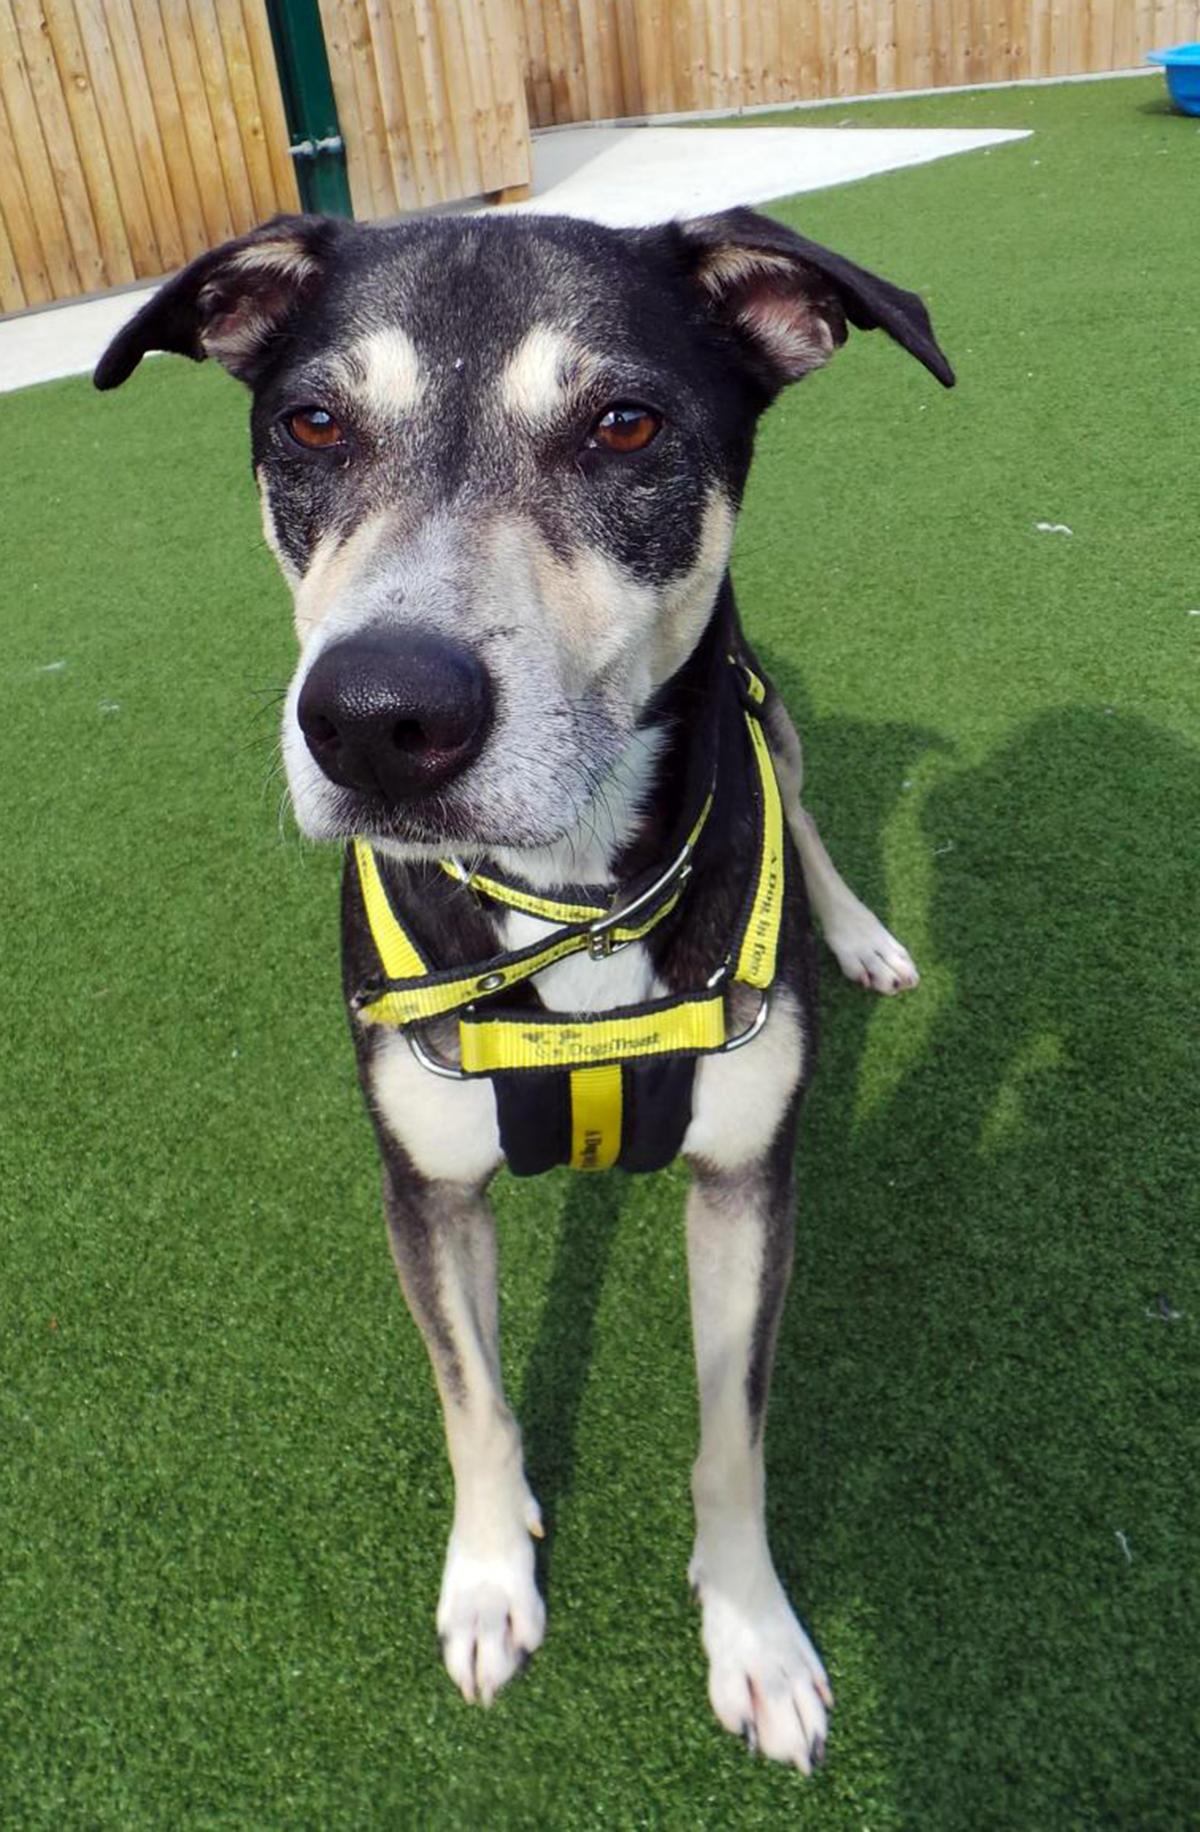 22/04 Jester – Six and a half year old male crossbreed
Jester is a handsome chap who sadly is finding kennel life difficult . Jester likes being around people